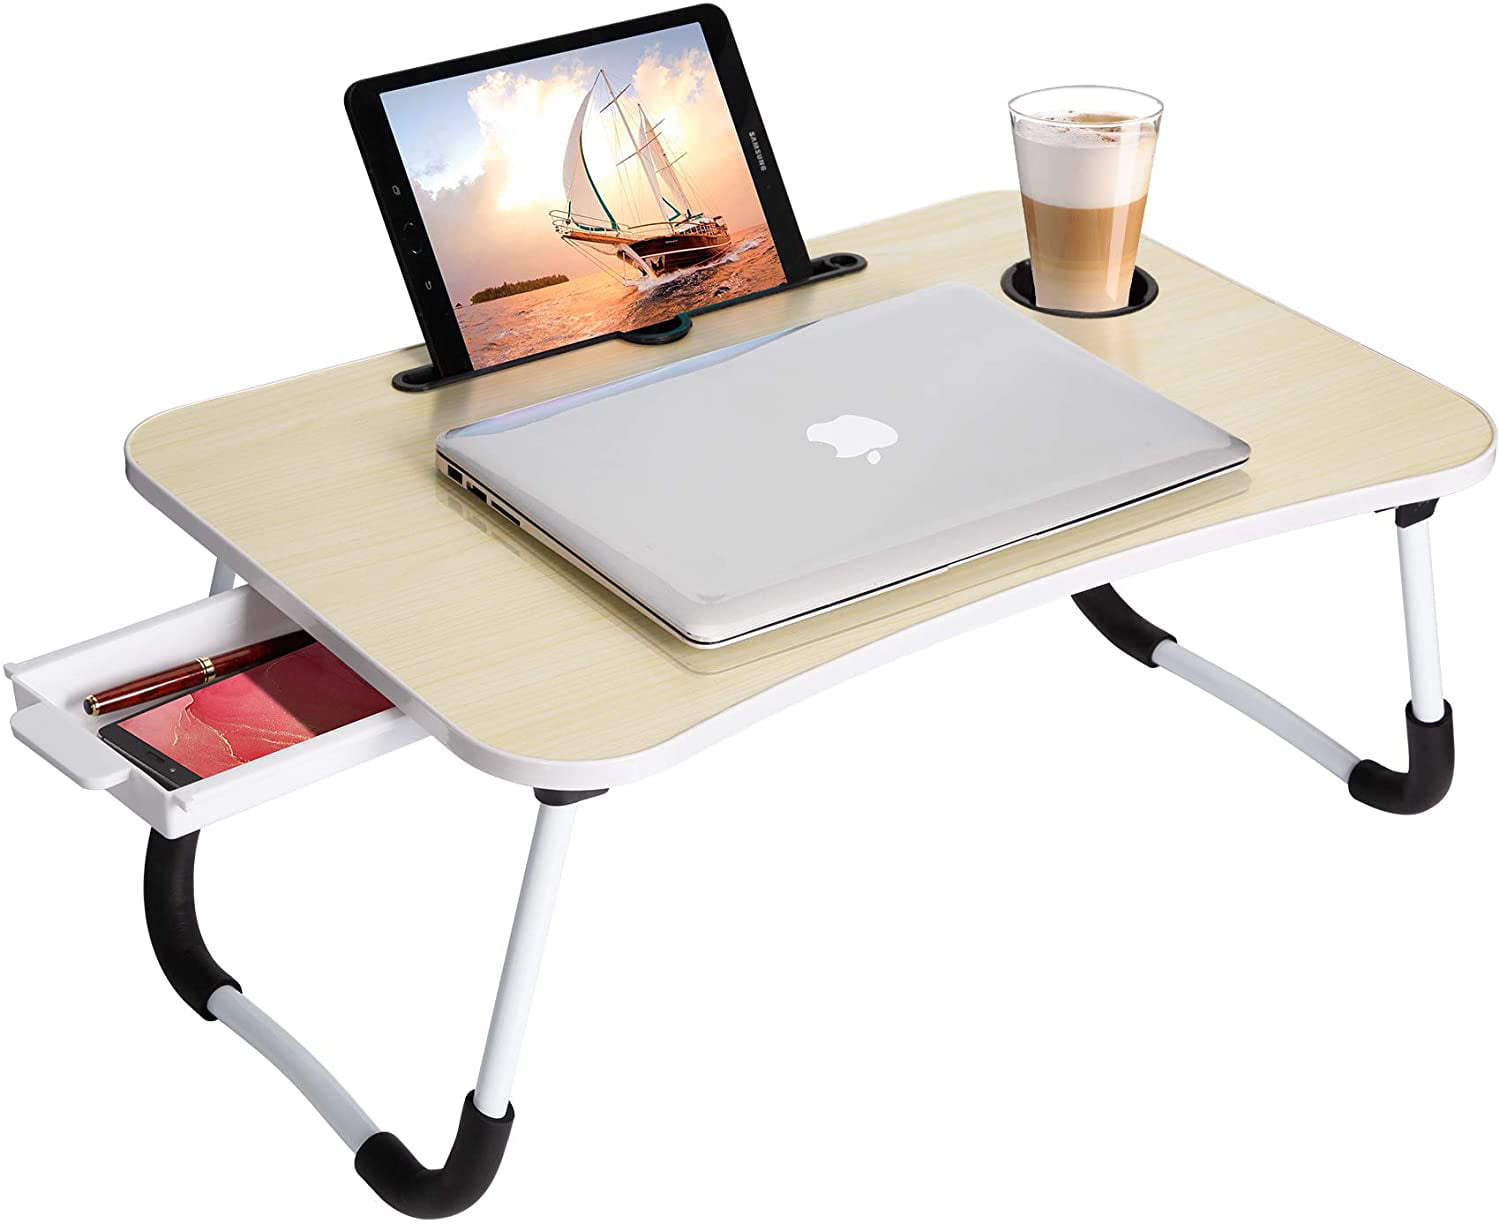 Details about   Foldable Laptop Table Tray Desk W/Mouse Board Tablet Desk Stand Bed Sofa Couch 